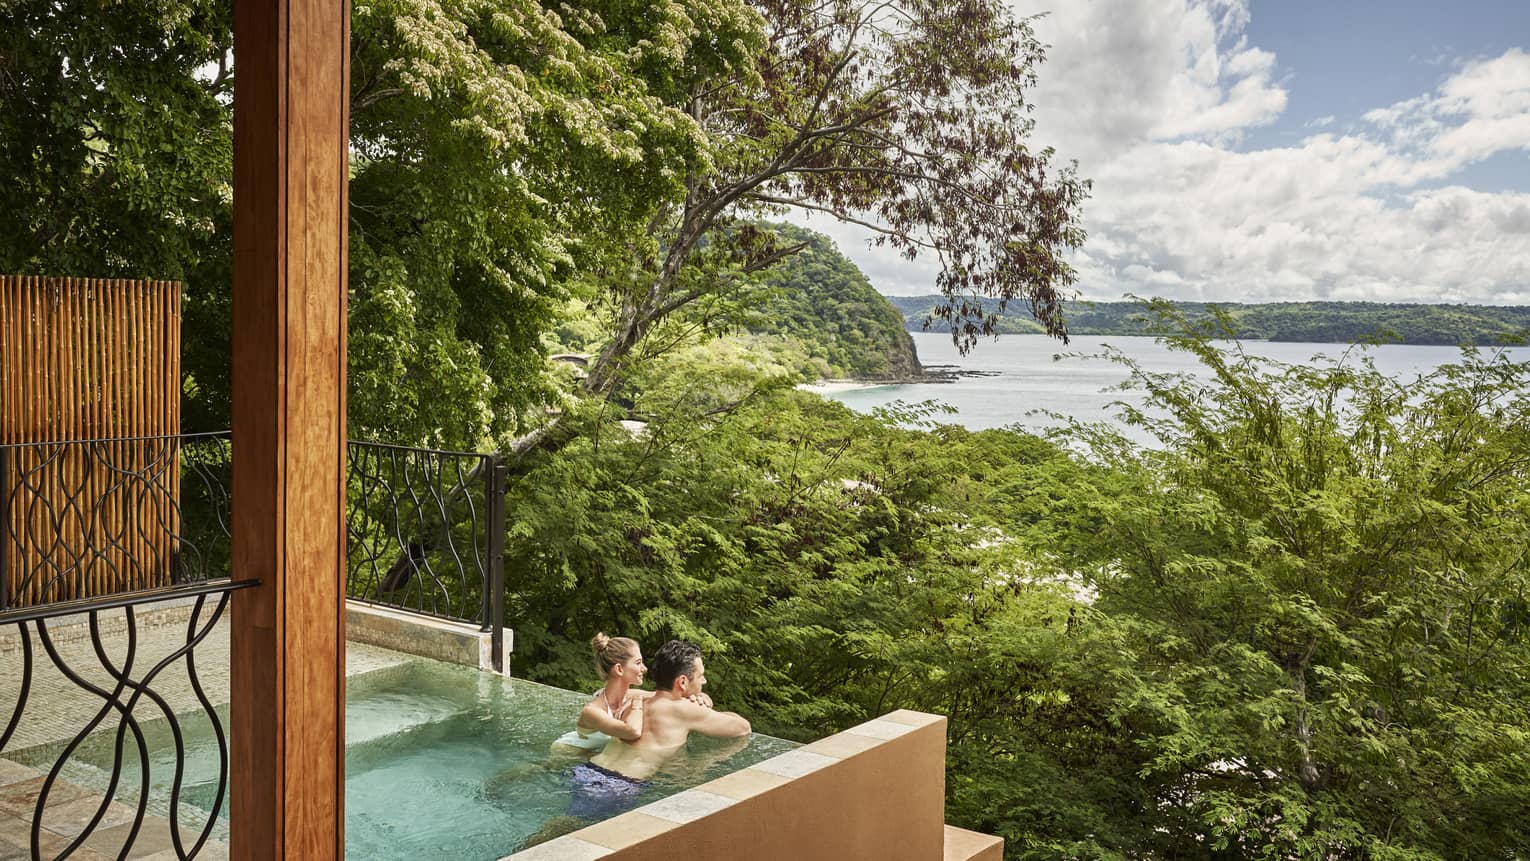 Couple in private plunge pool looking out to trees and ocean